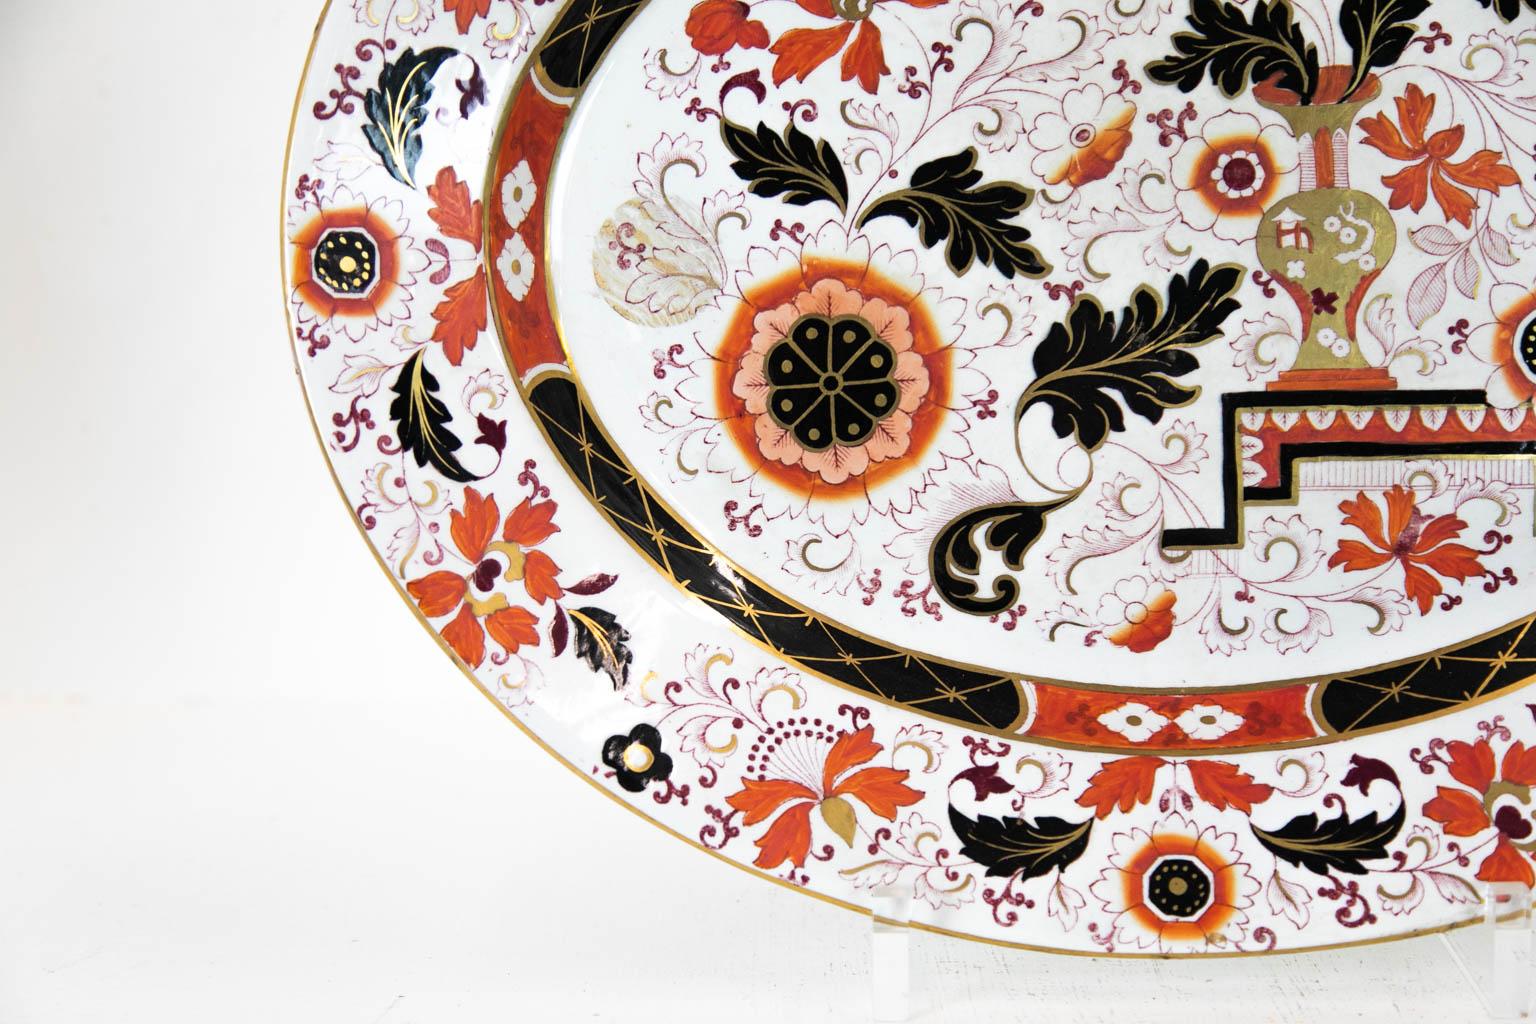 This platter is signed: Ashworth Ironstone. It has gilt floral designs with vases, leaves, and flowers. It is in mint condition.